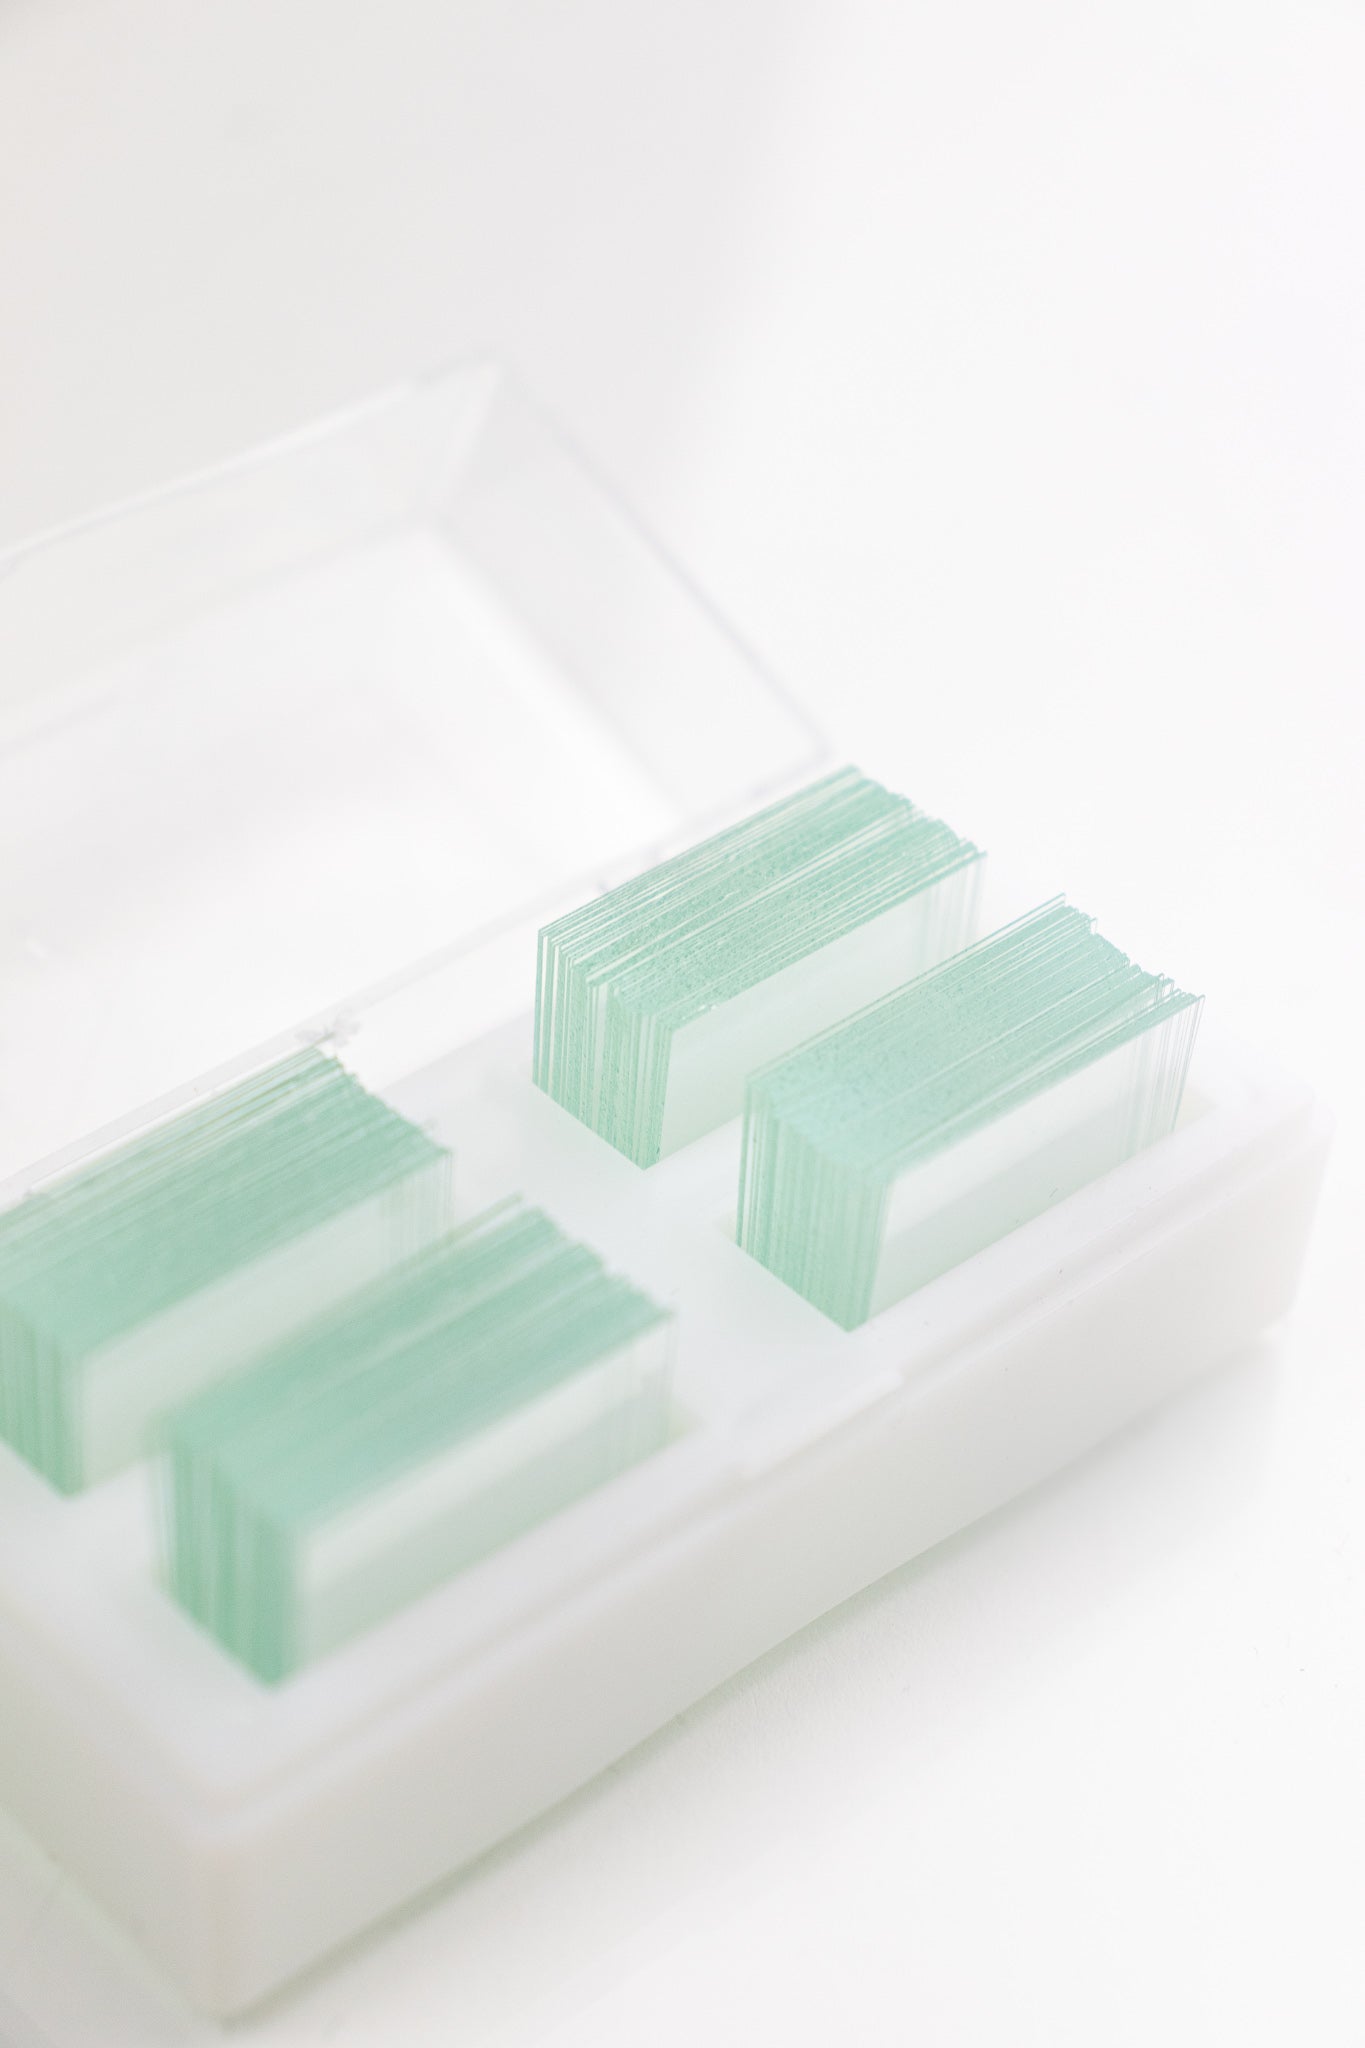 Glass Cover Slips - Stemcell Science Shop